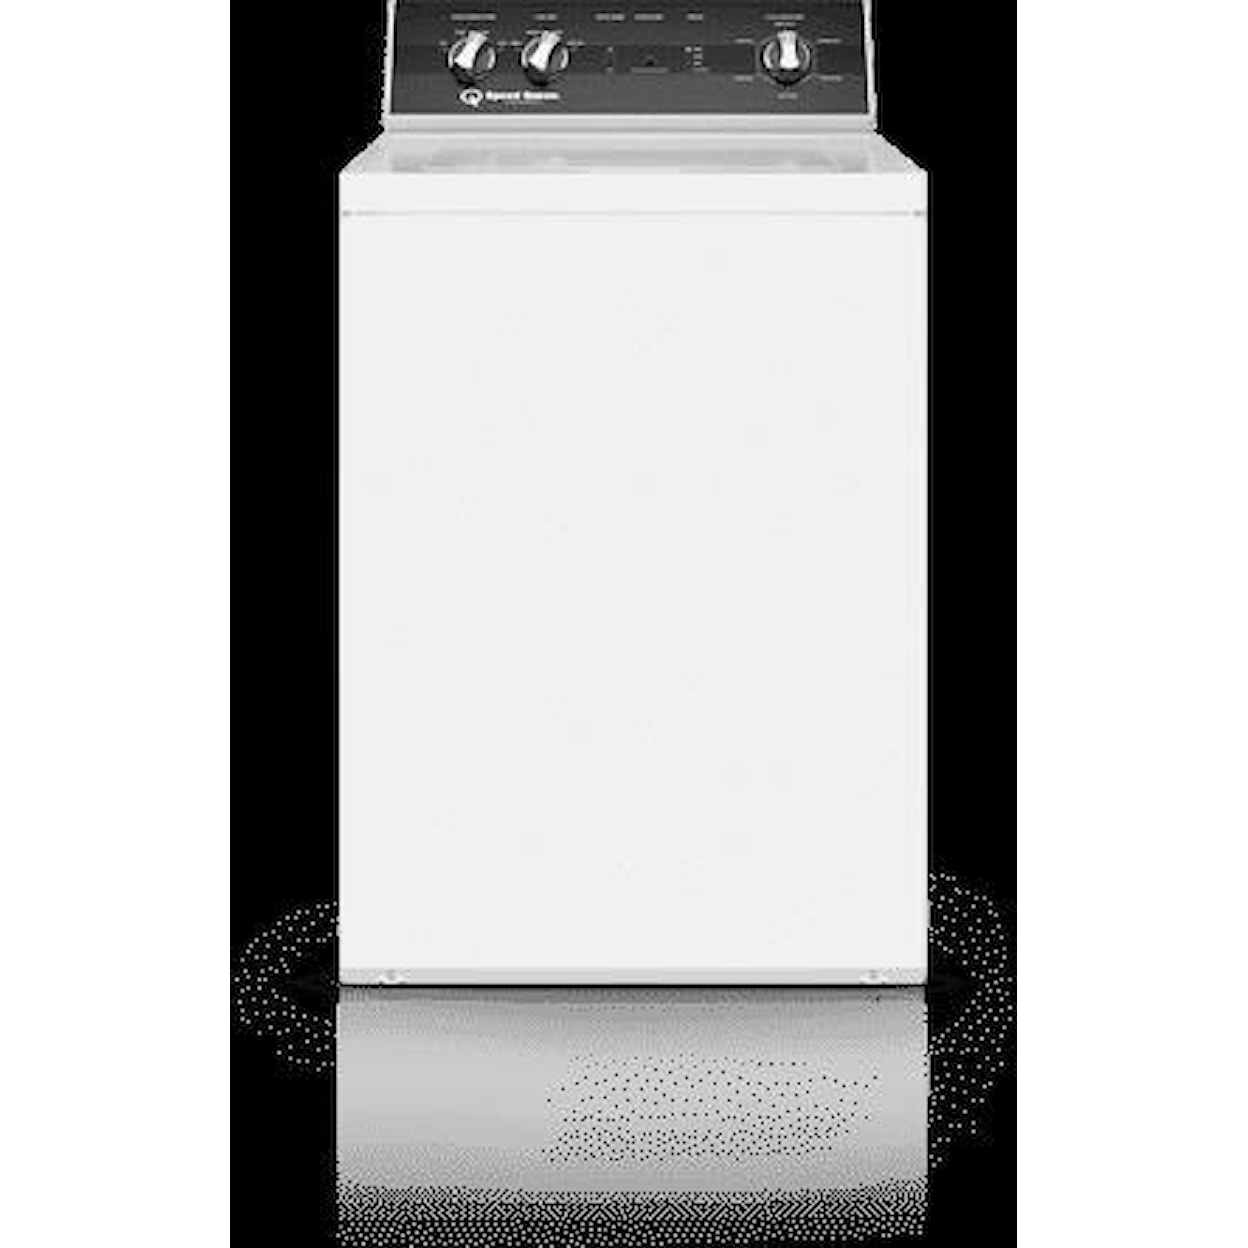 Speed Queen Washers 3.2 CU FT WASHER